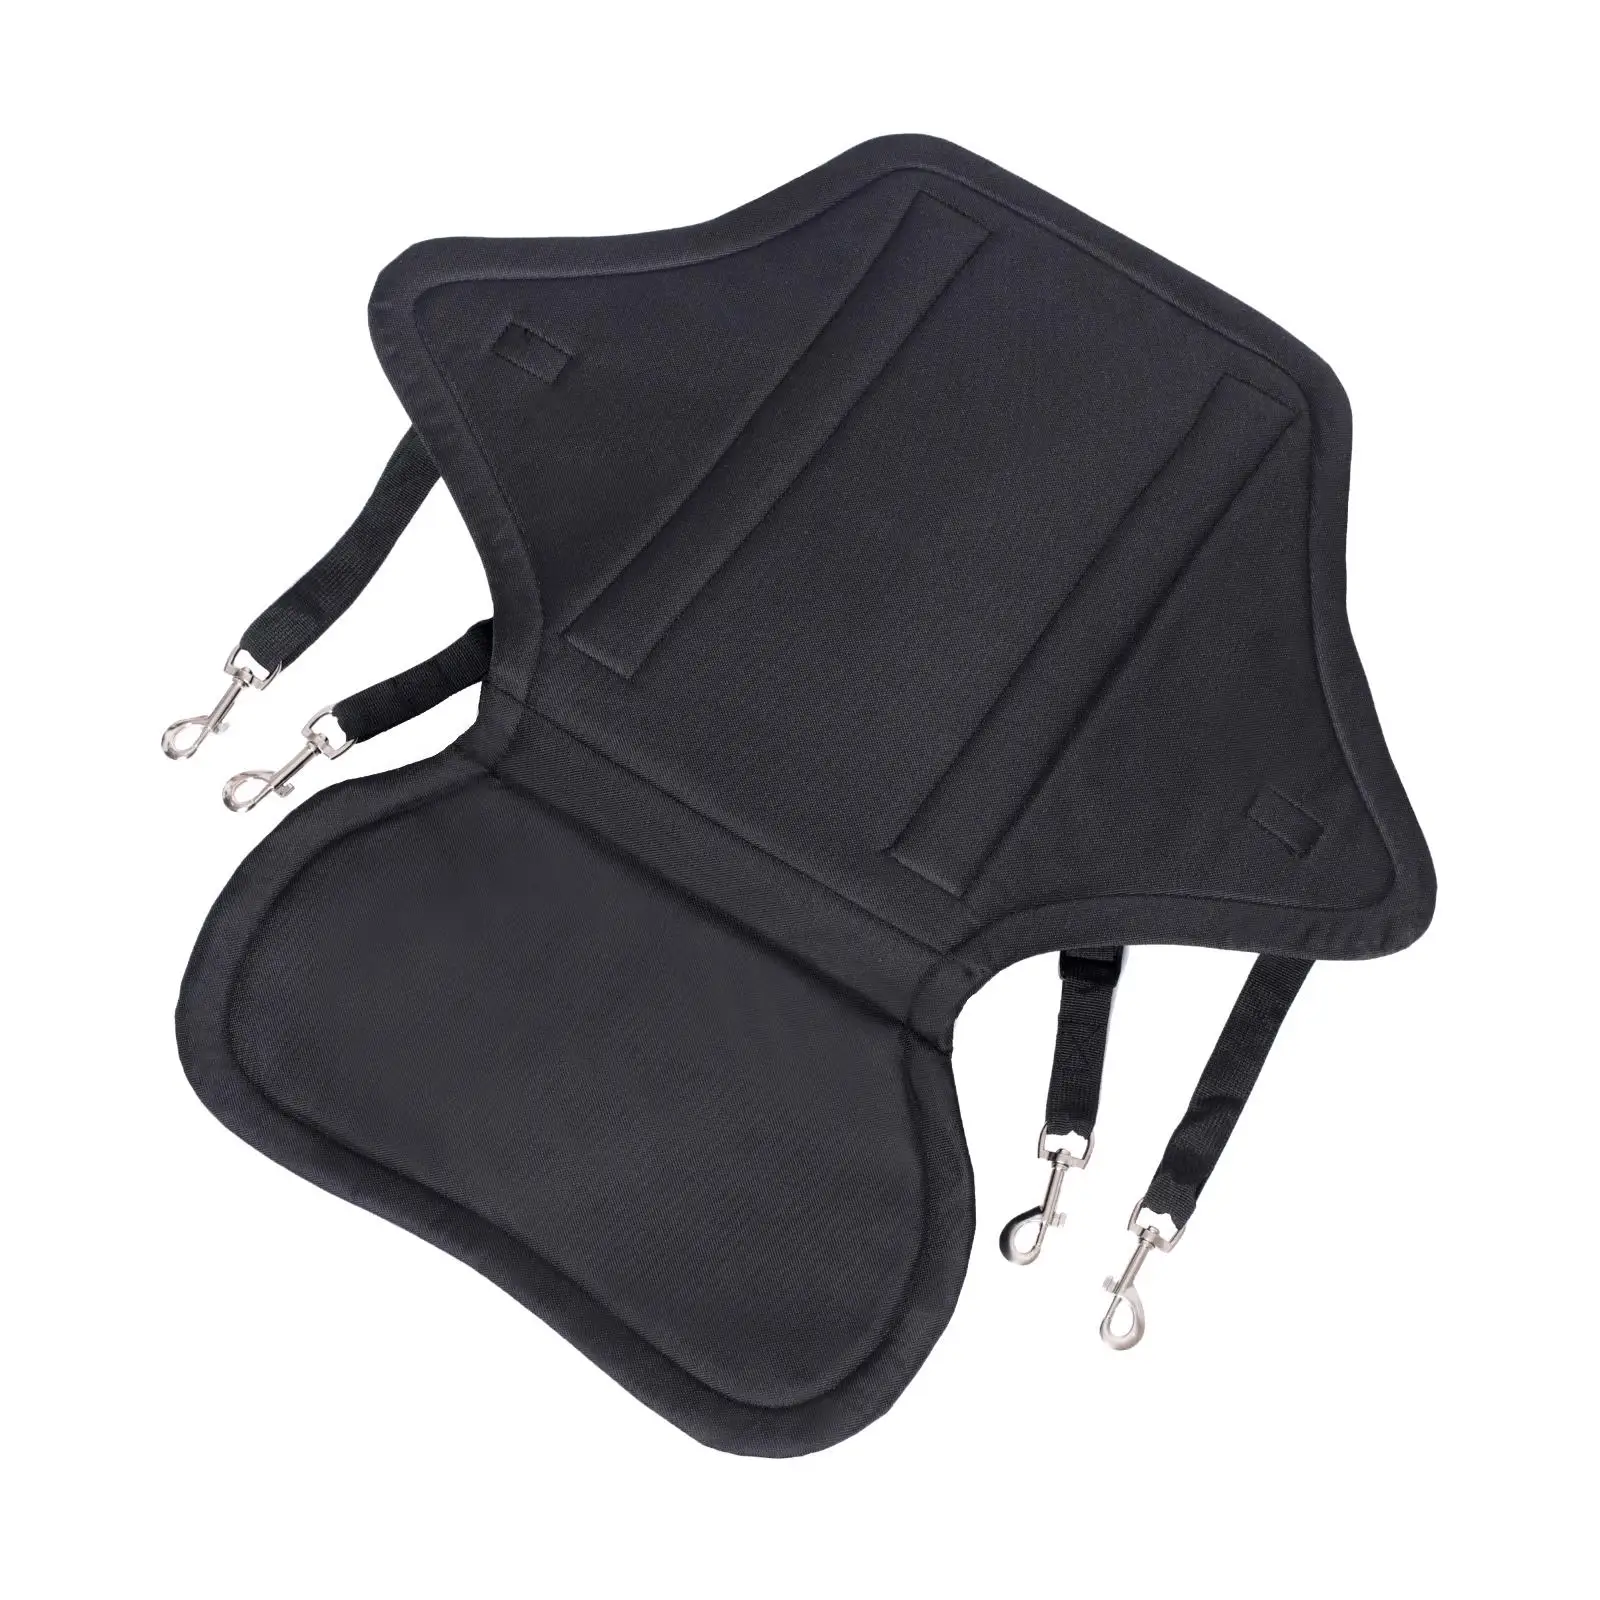 Padded Kayak Seat Cushion Comfortable with Support Black Backrest Luxurious for Children Universal Sit Fishing Adults Kids